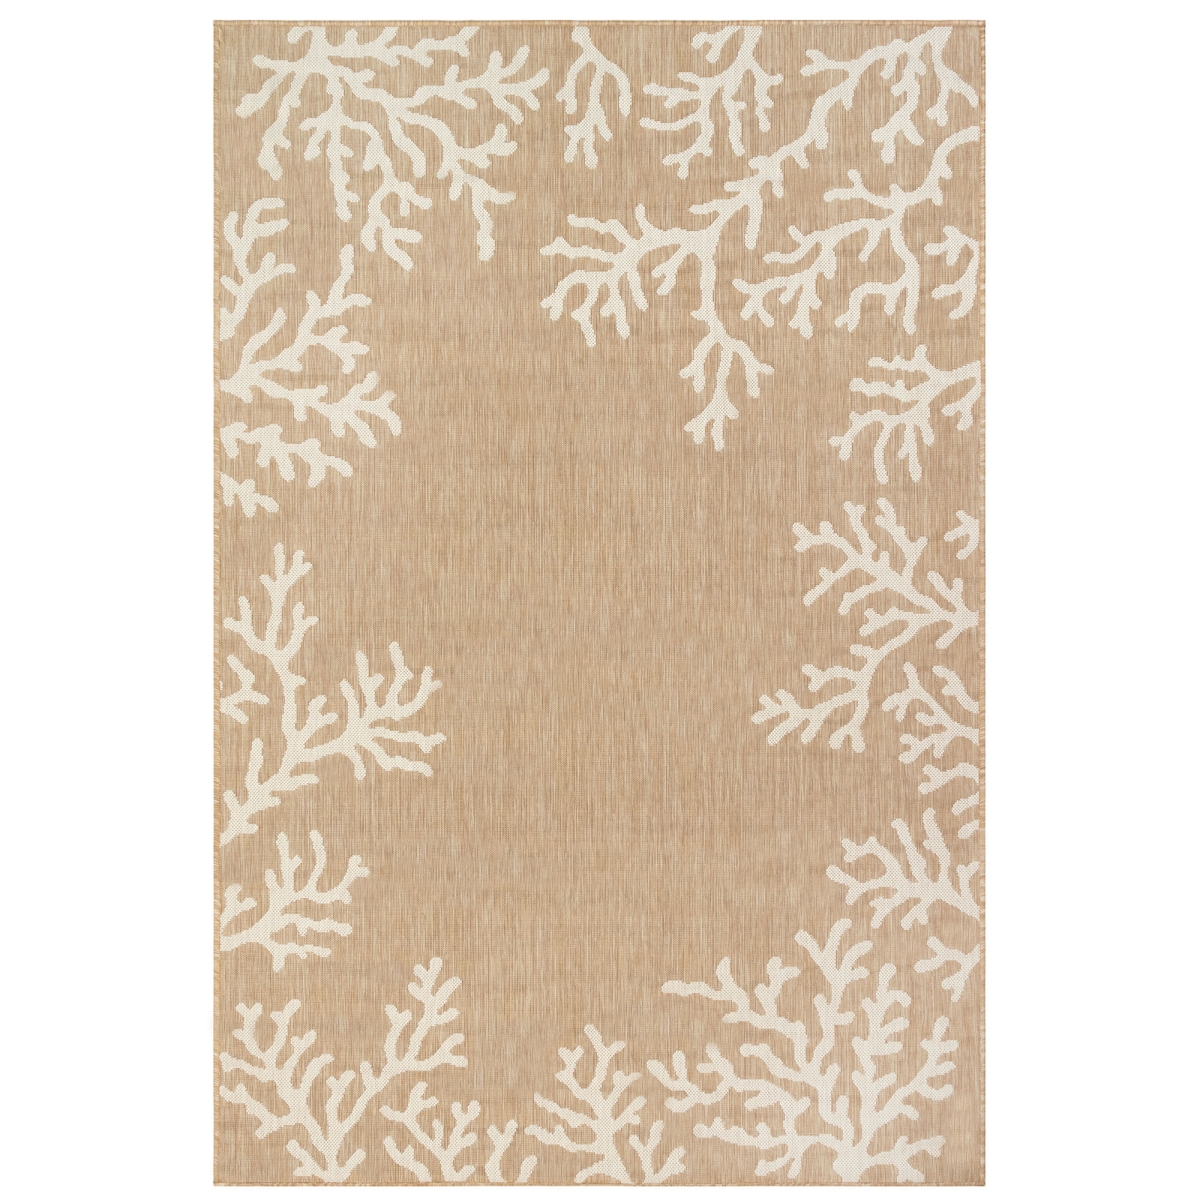 Cre45844812 Liora Manne Carmel Coral Border Indoor & Outdoor Rug, Sand - 39 X 59 In.